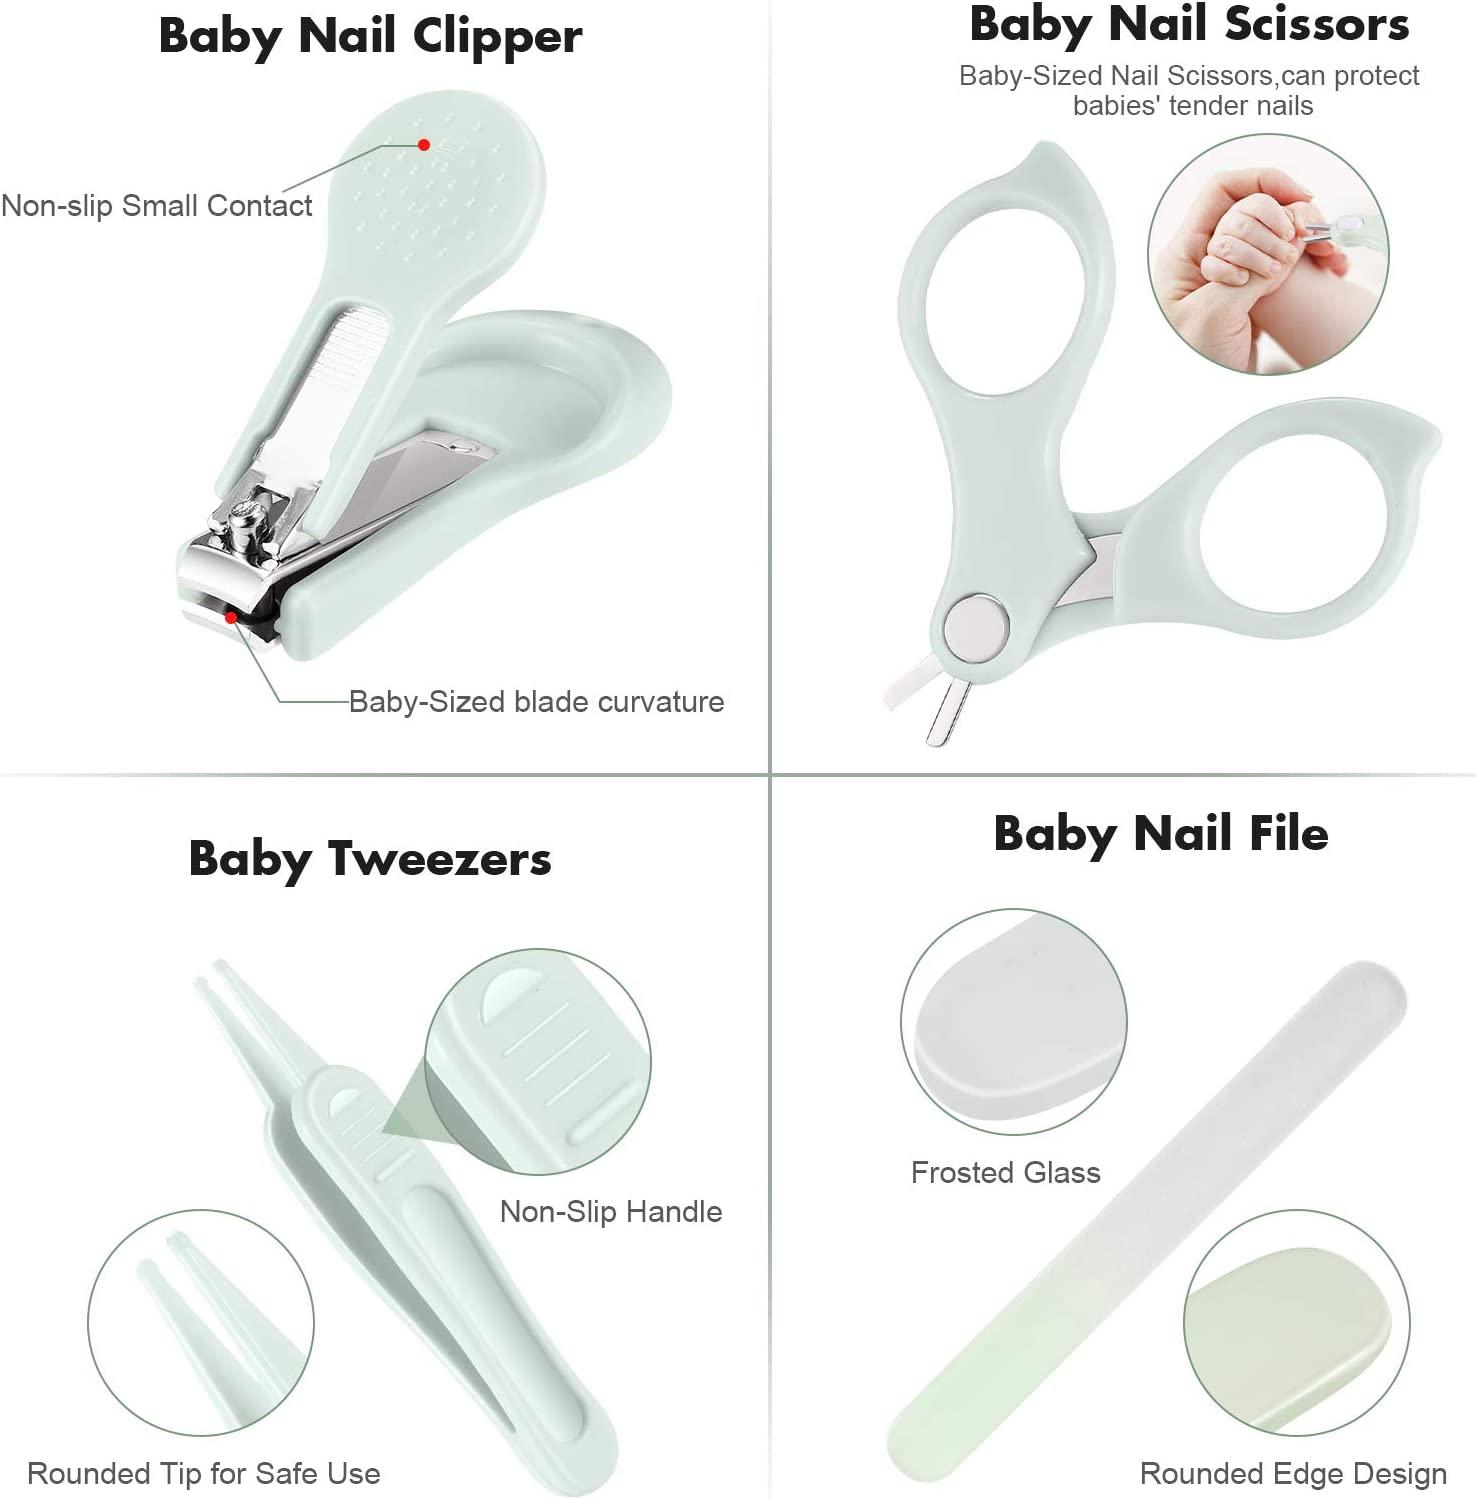 Baby Nail Clippers, 4-in-1 Safe Baby Nail Kit with Cute Case, Nail Clipper,  Scissors, Tweezers, Nail File Set for Newborn, Infant, Toddler and Kids-Owl  Green